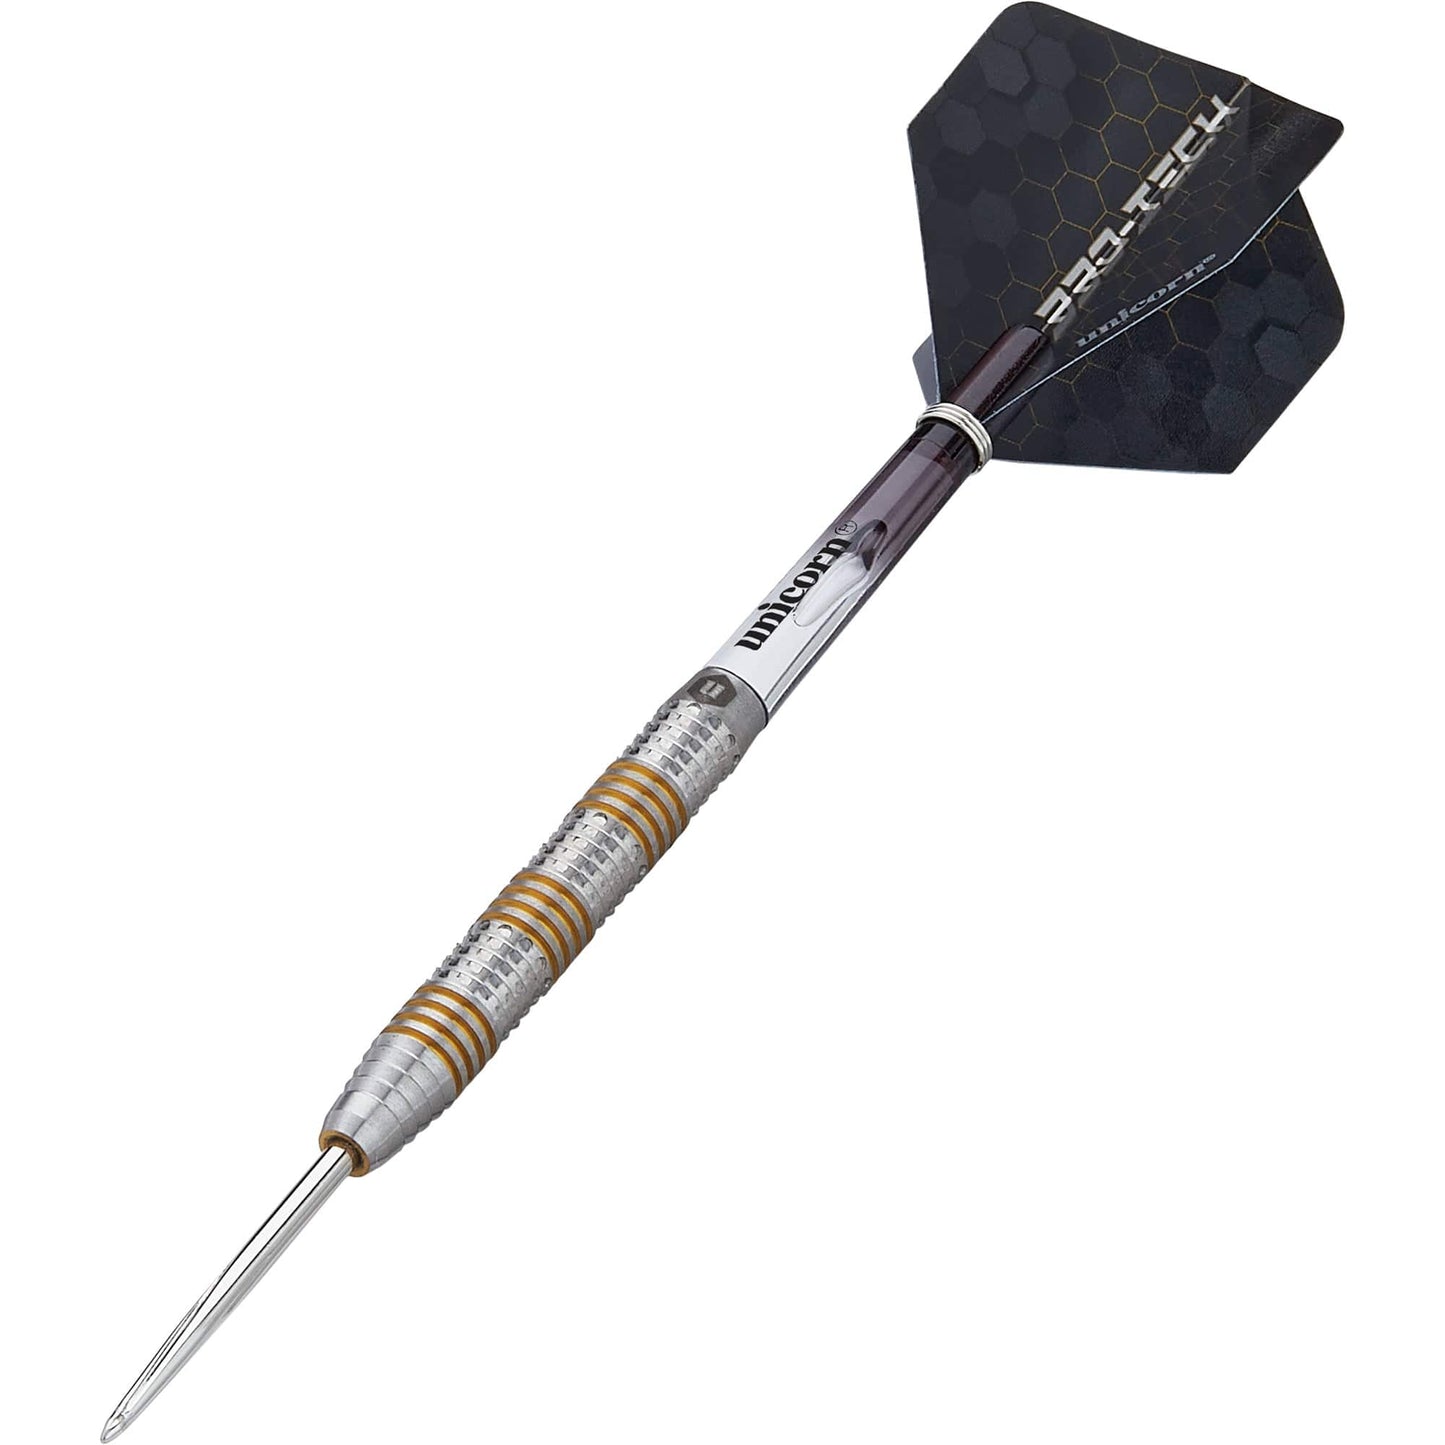 Unicorn Protech Darts - Style 3 - Steel Tip - Gold Ring